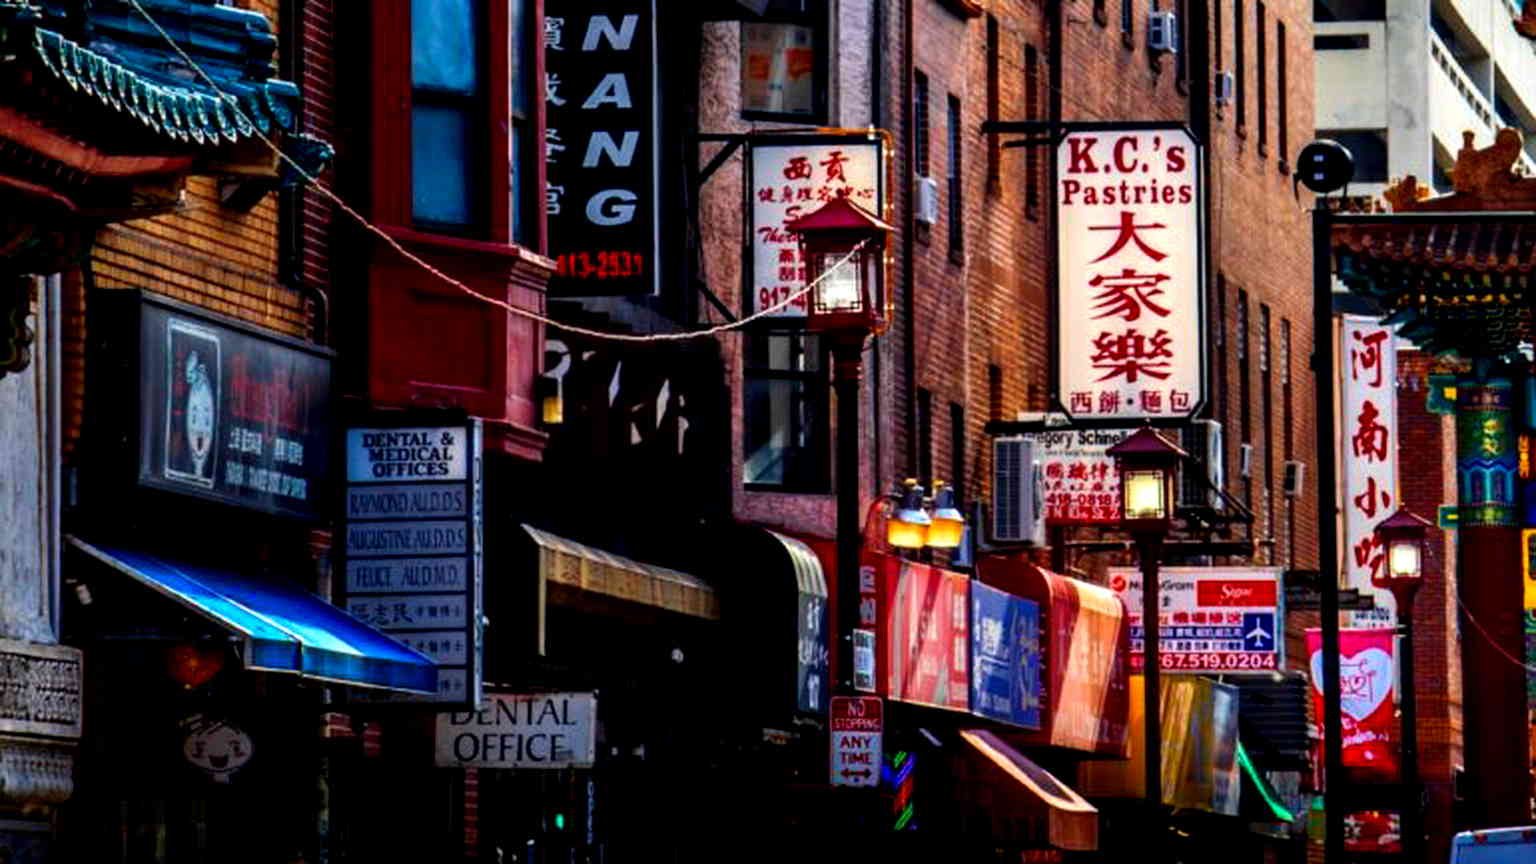 Seattle, Philadelphia Chinatowns among ‘America’s 11 Most Endangered Historic Places’